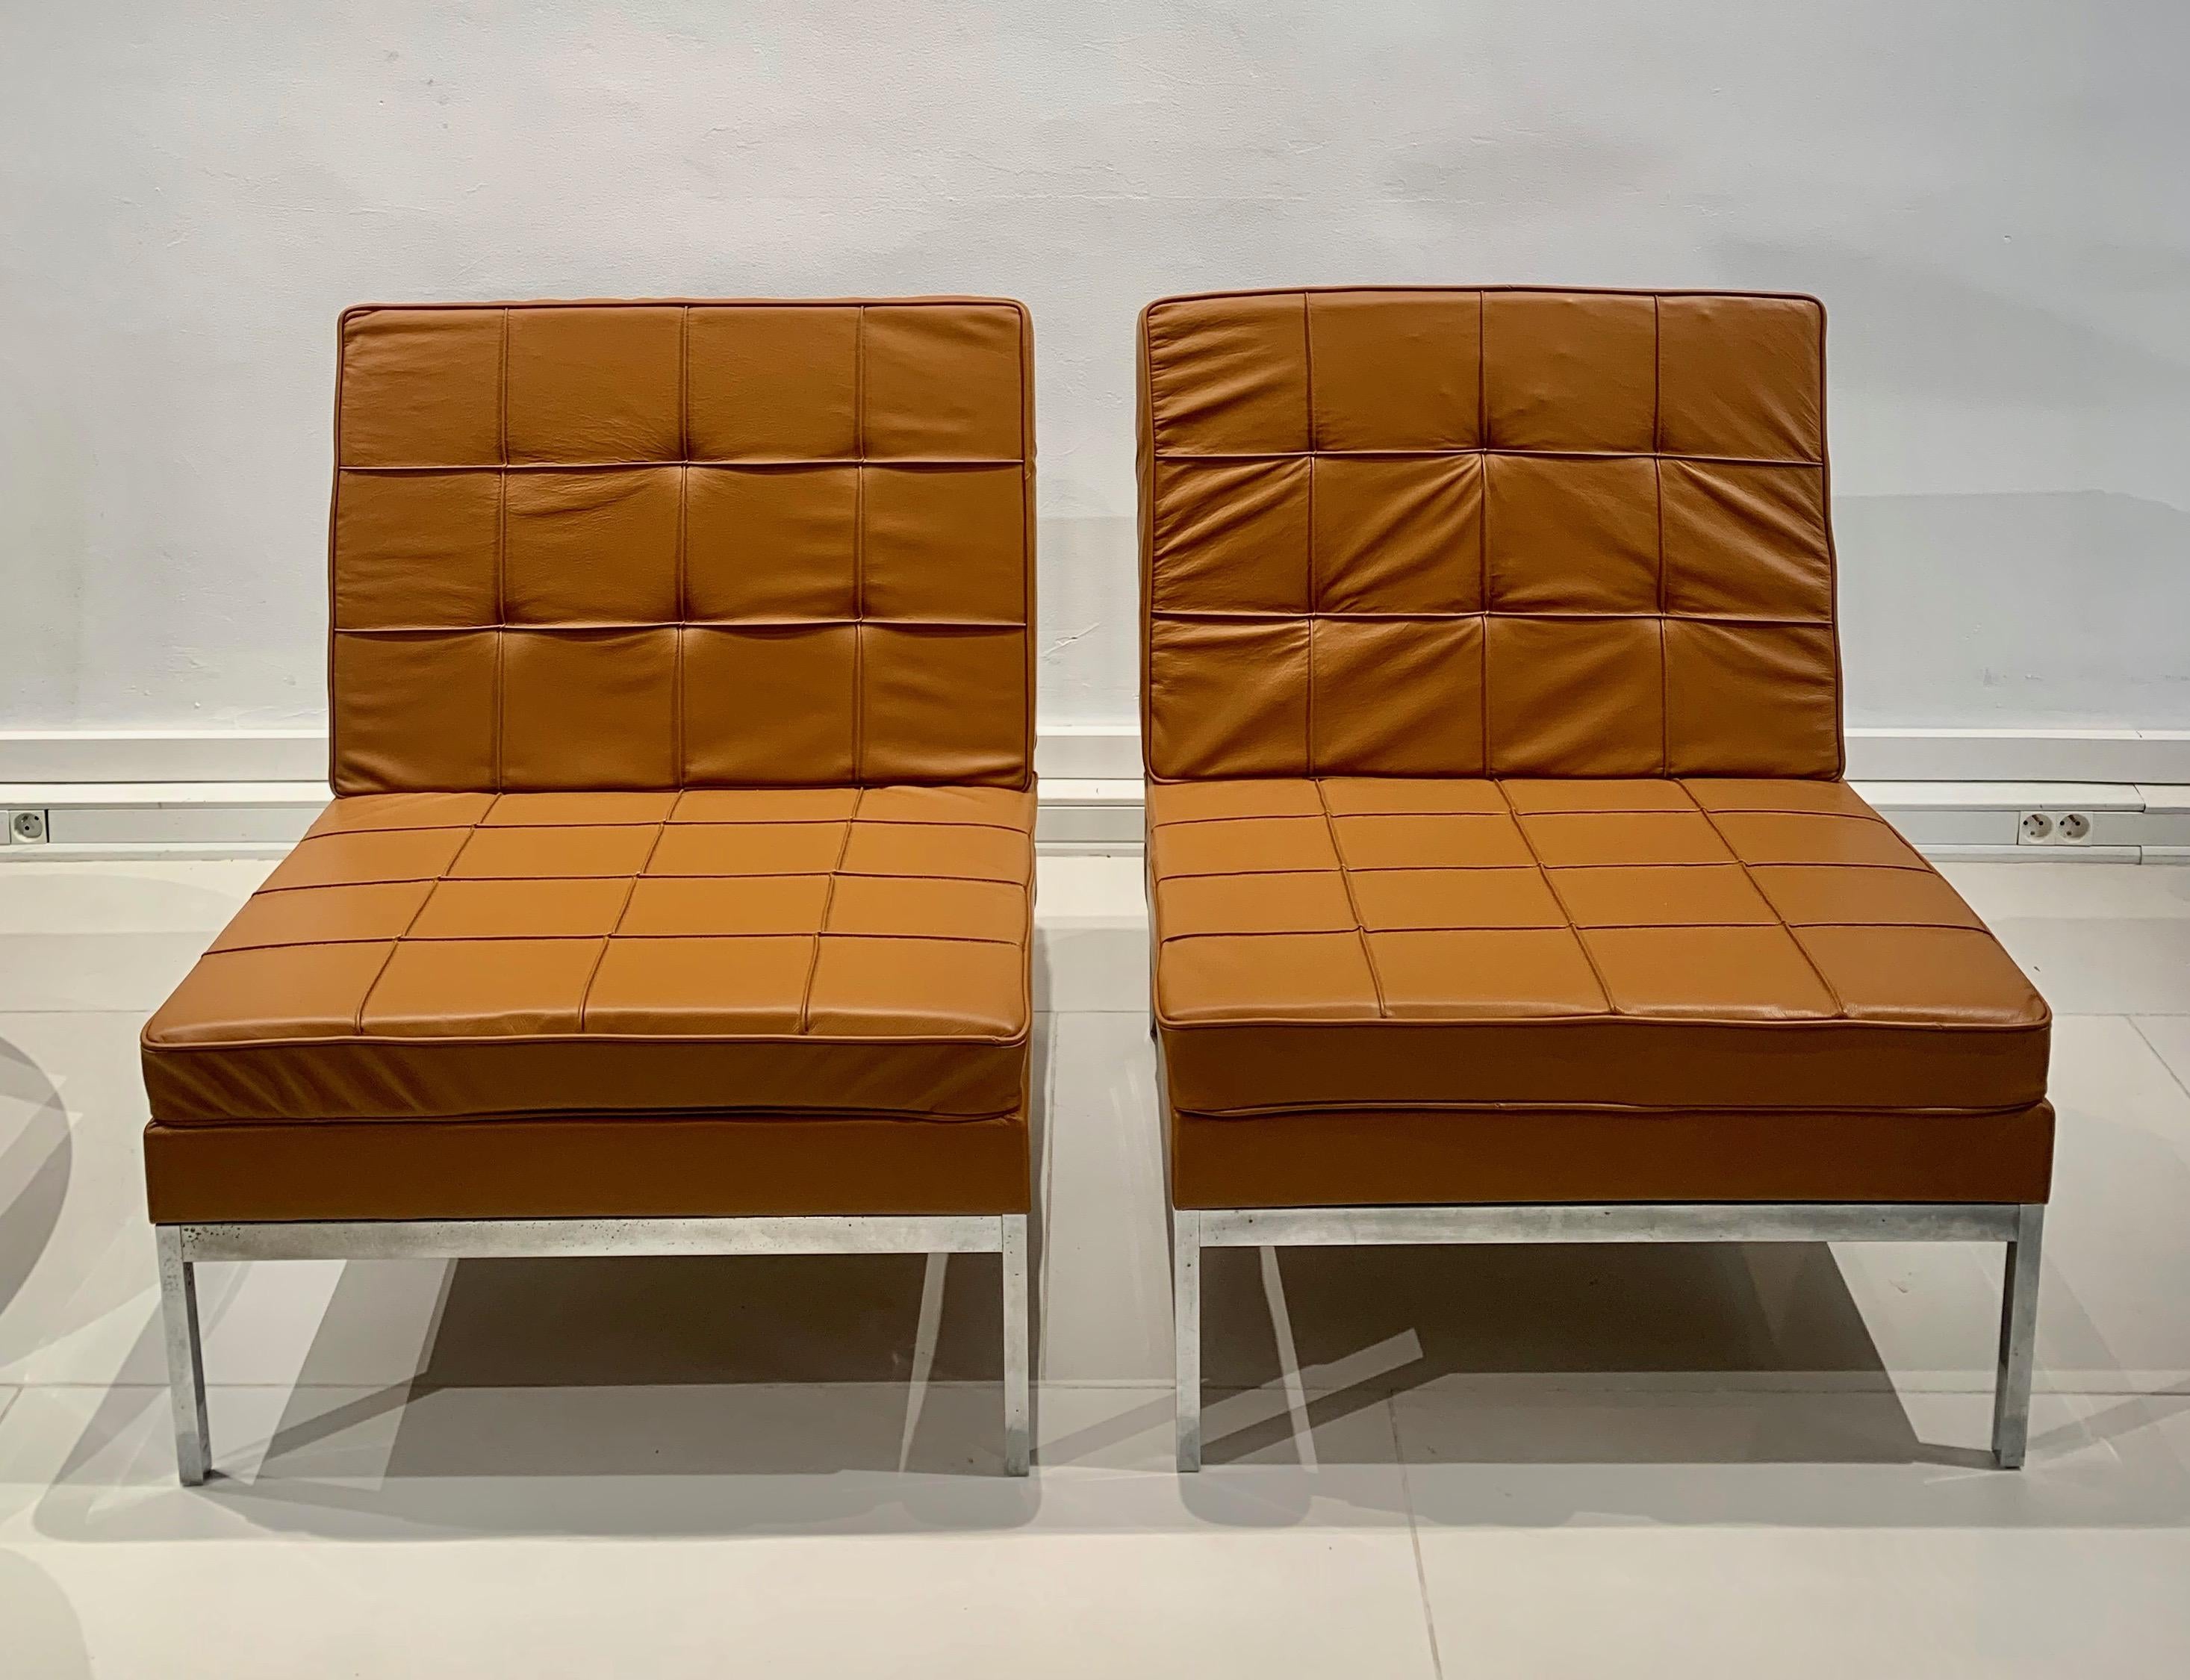 Pair of camel leather armchairs by Florence Knoll for Knoll. Very good condition. The leather is new
Dimensions : H78 x W72 x D67.